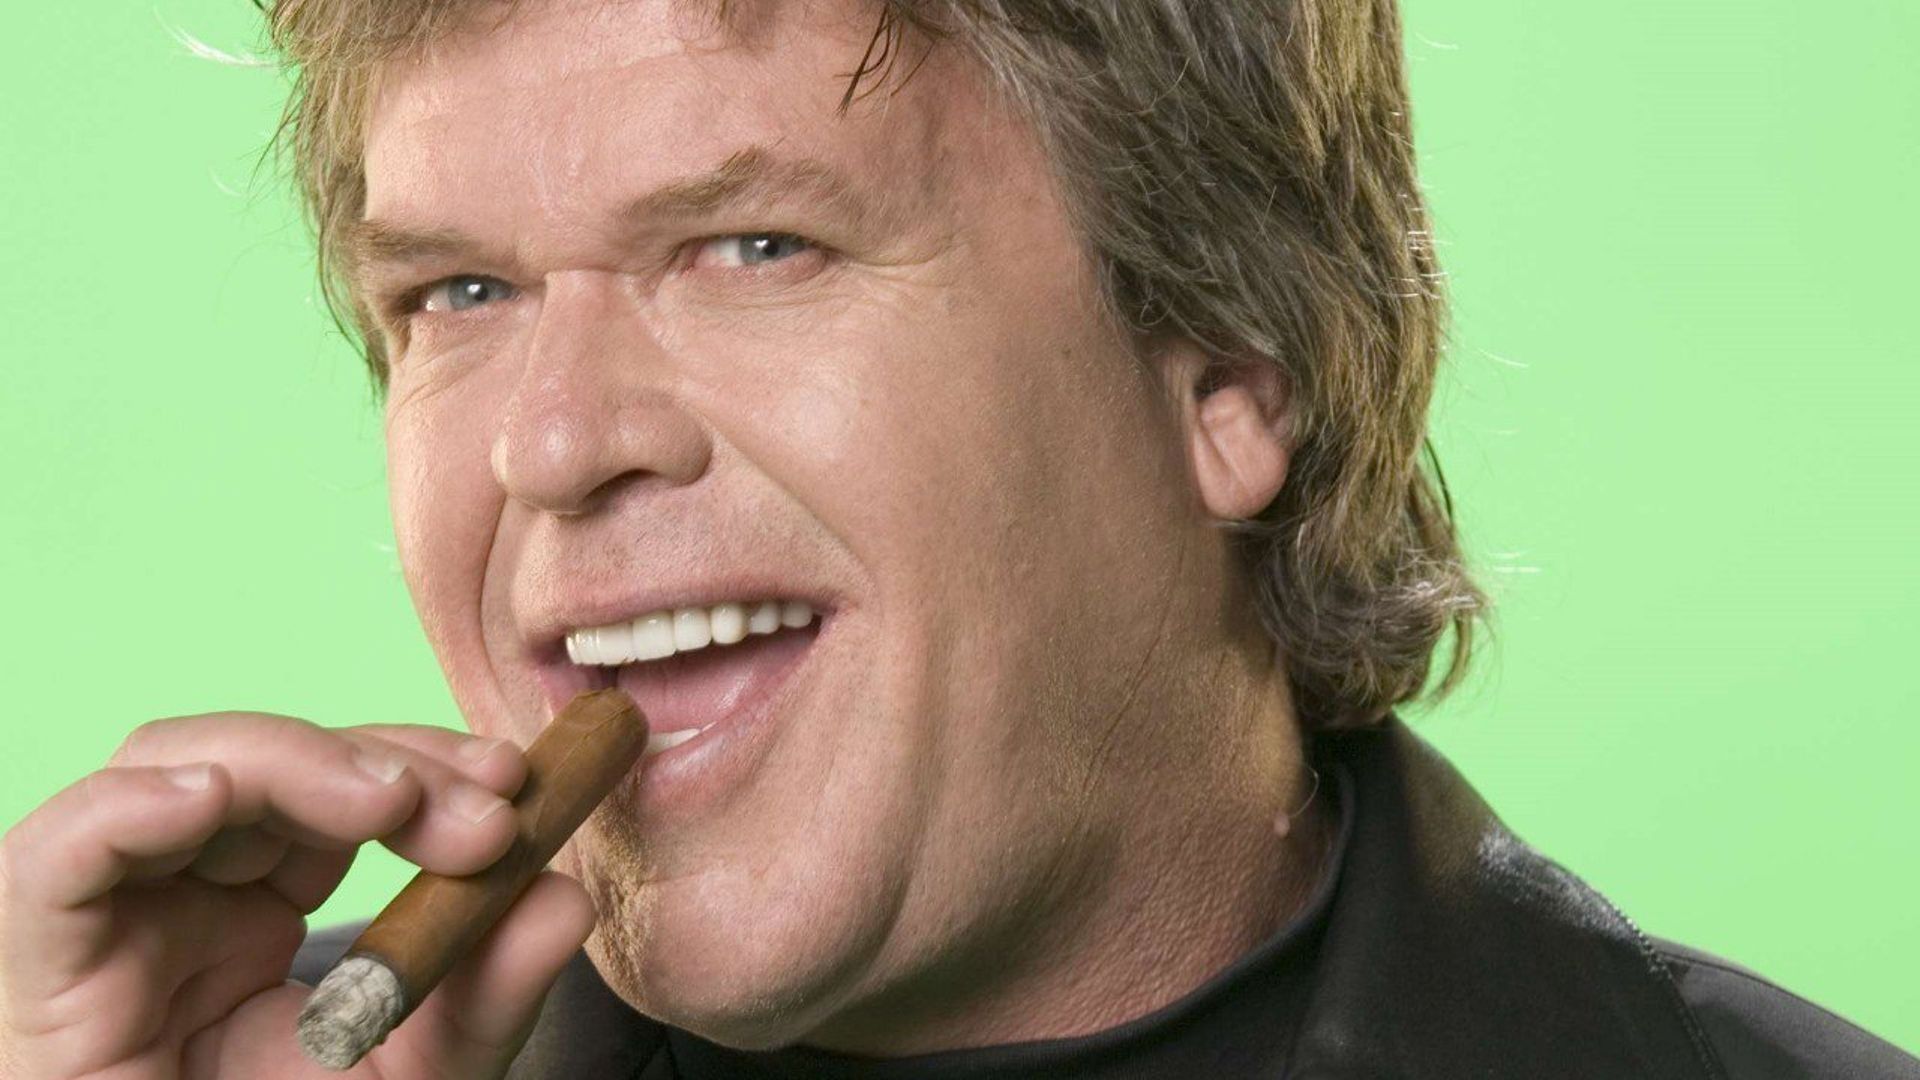 Ron White: They Call Me Tater Salad Backdrop